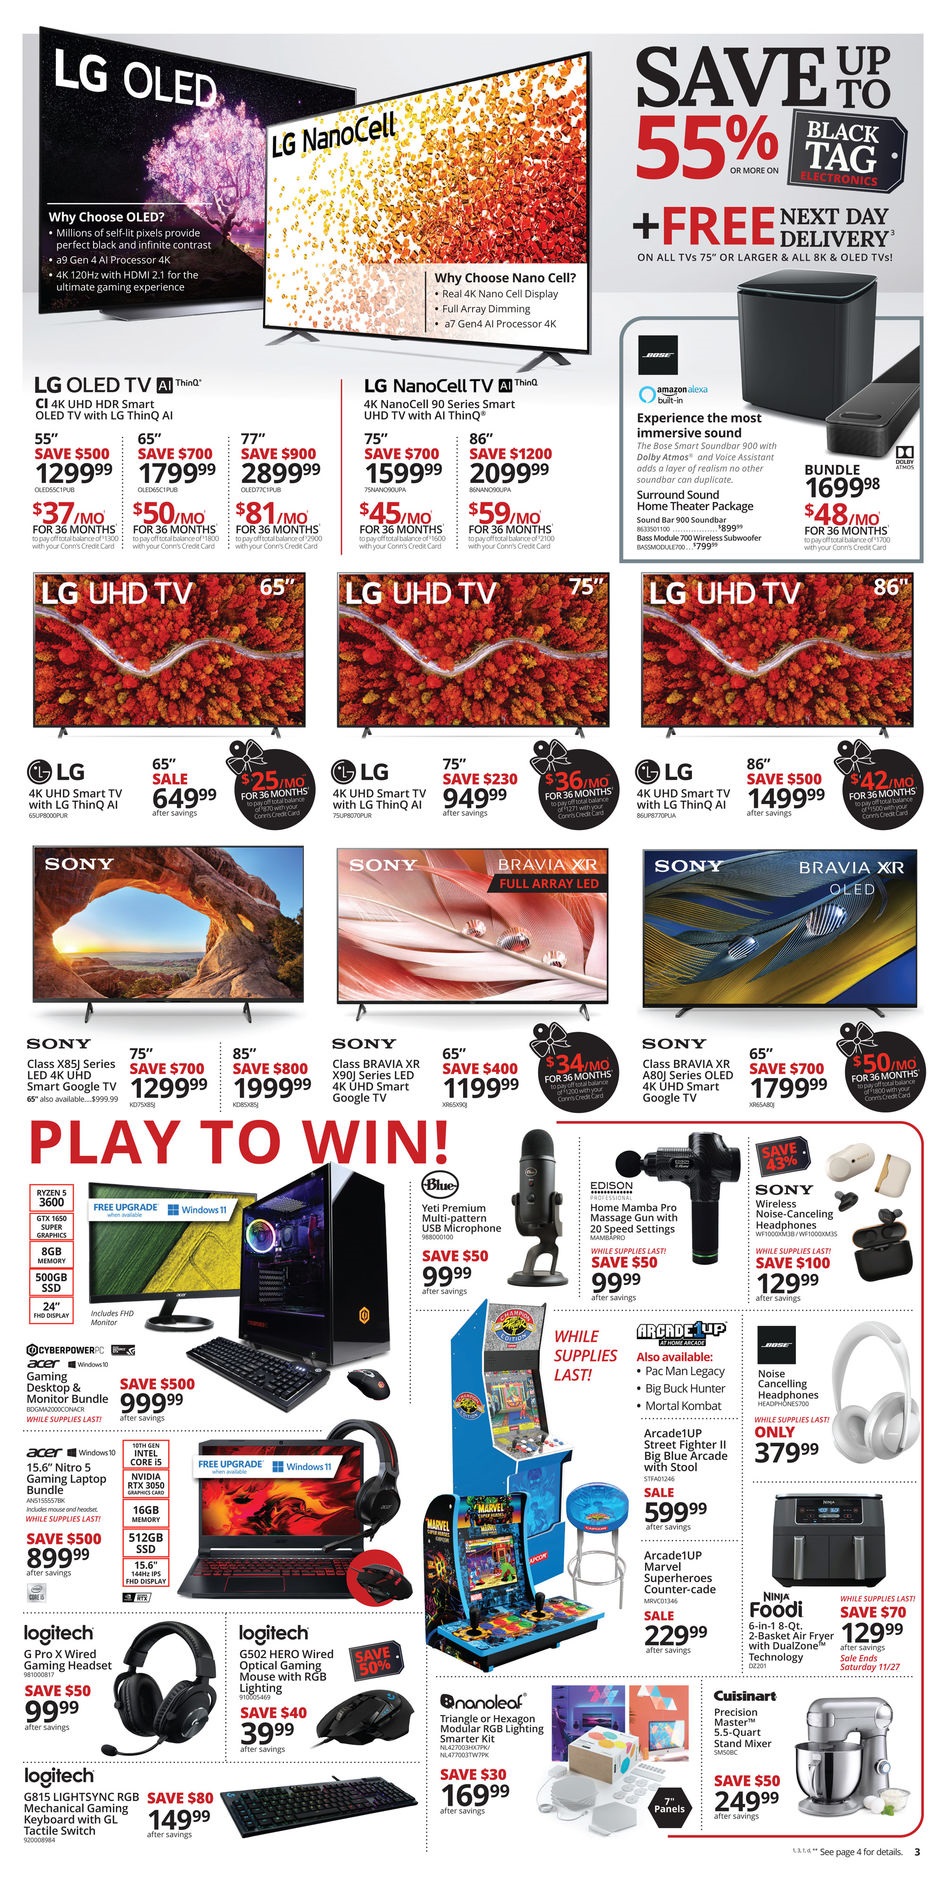 Conn's HomePlus 2021 Black Friday Ad Page 3